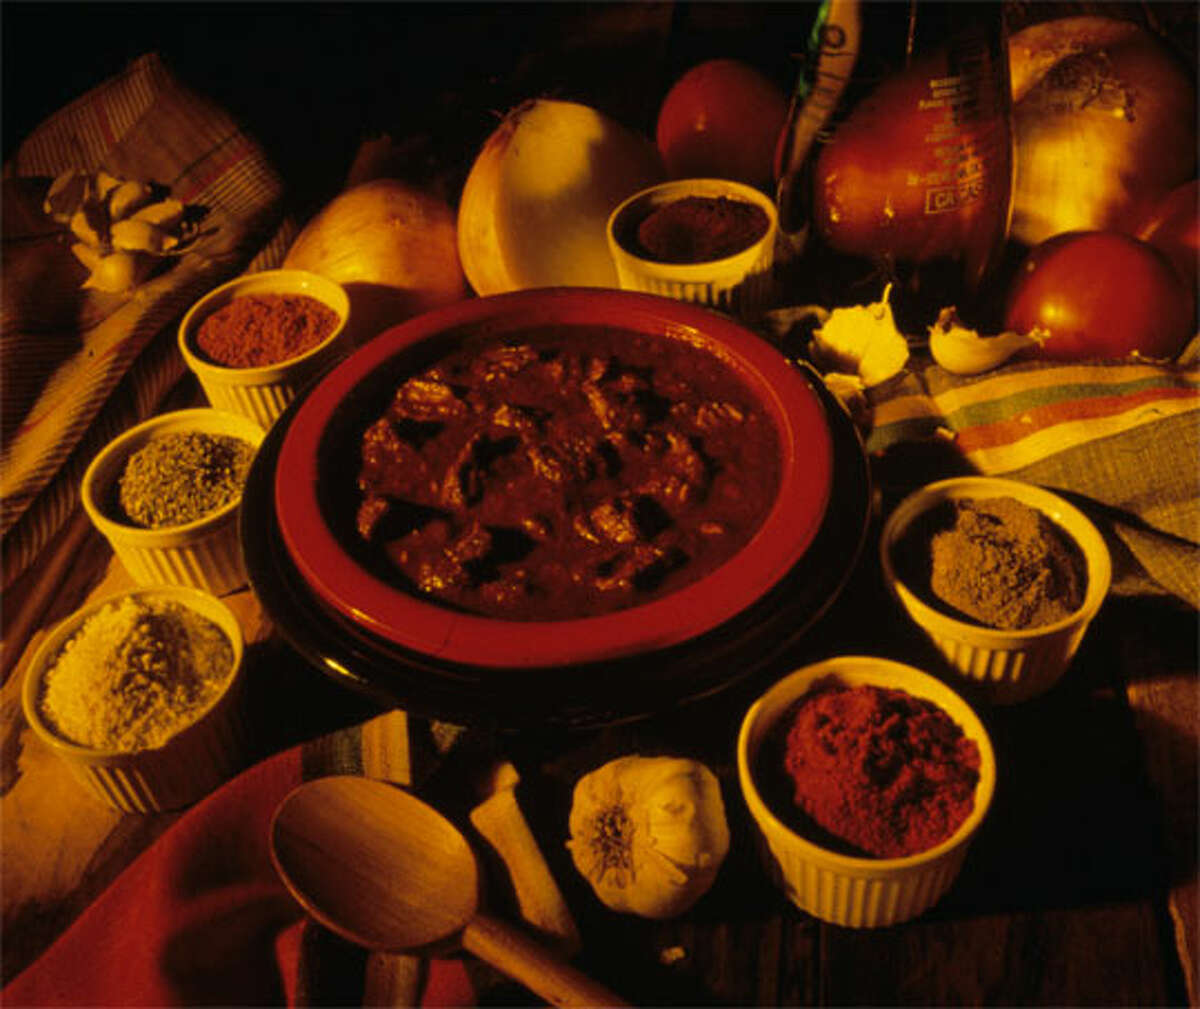 Chili champions suggest using fresh spices and not cooking the mixture too long to preserve the flavor.